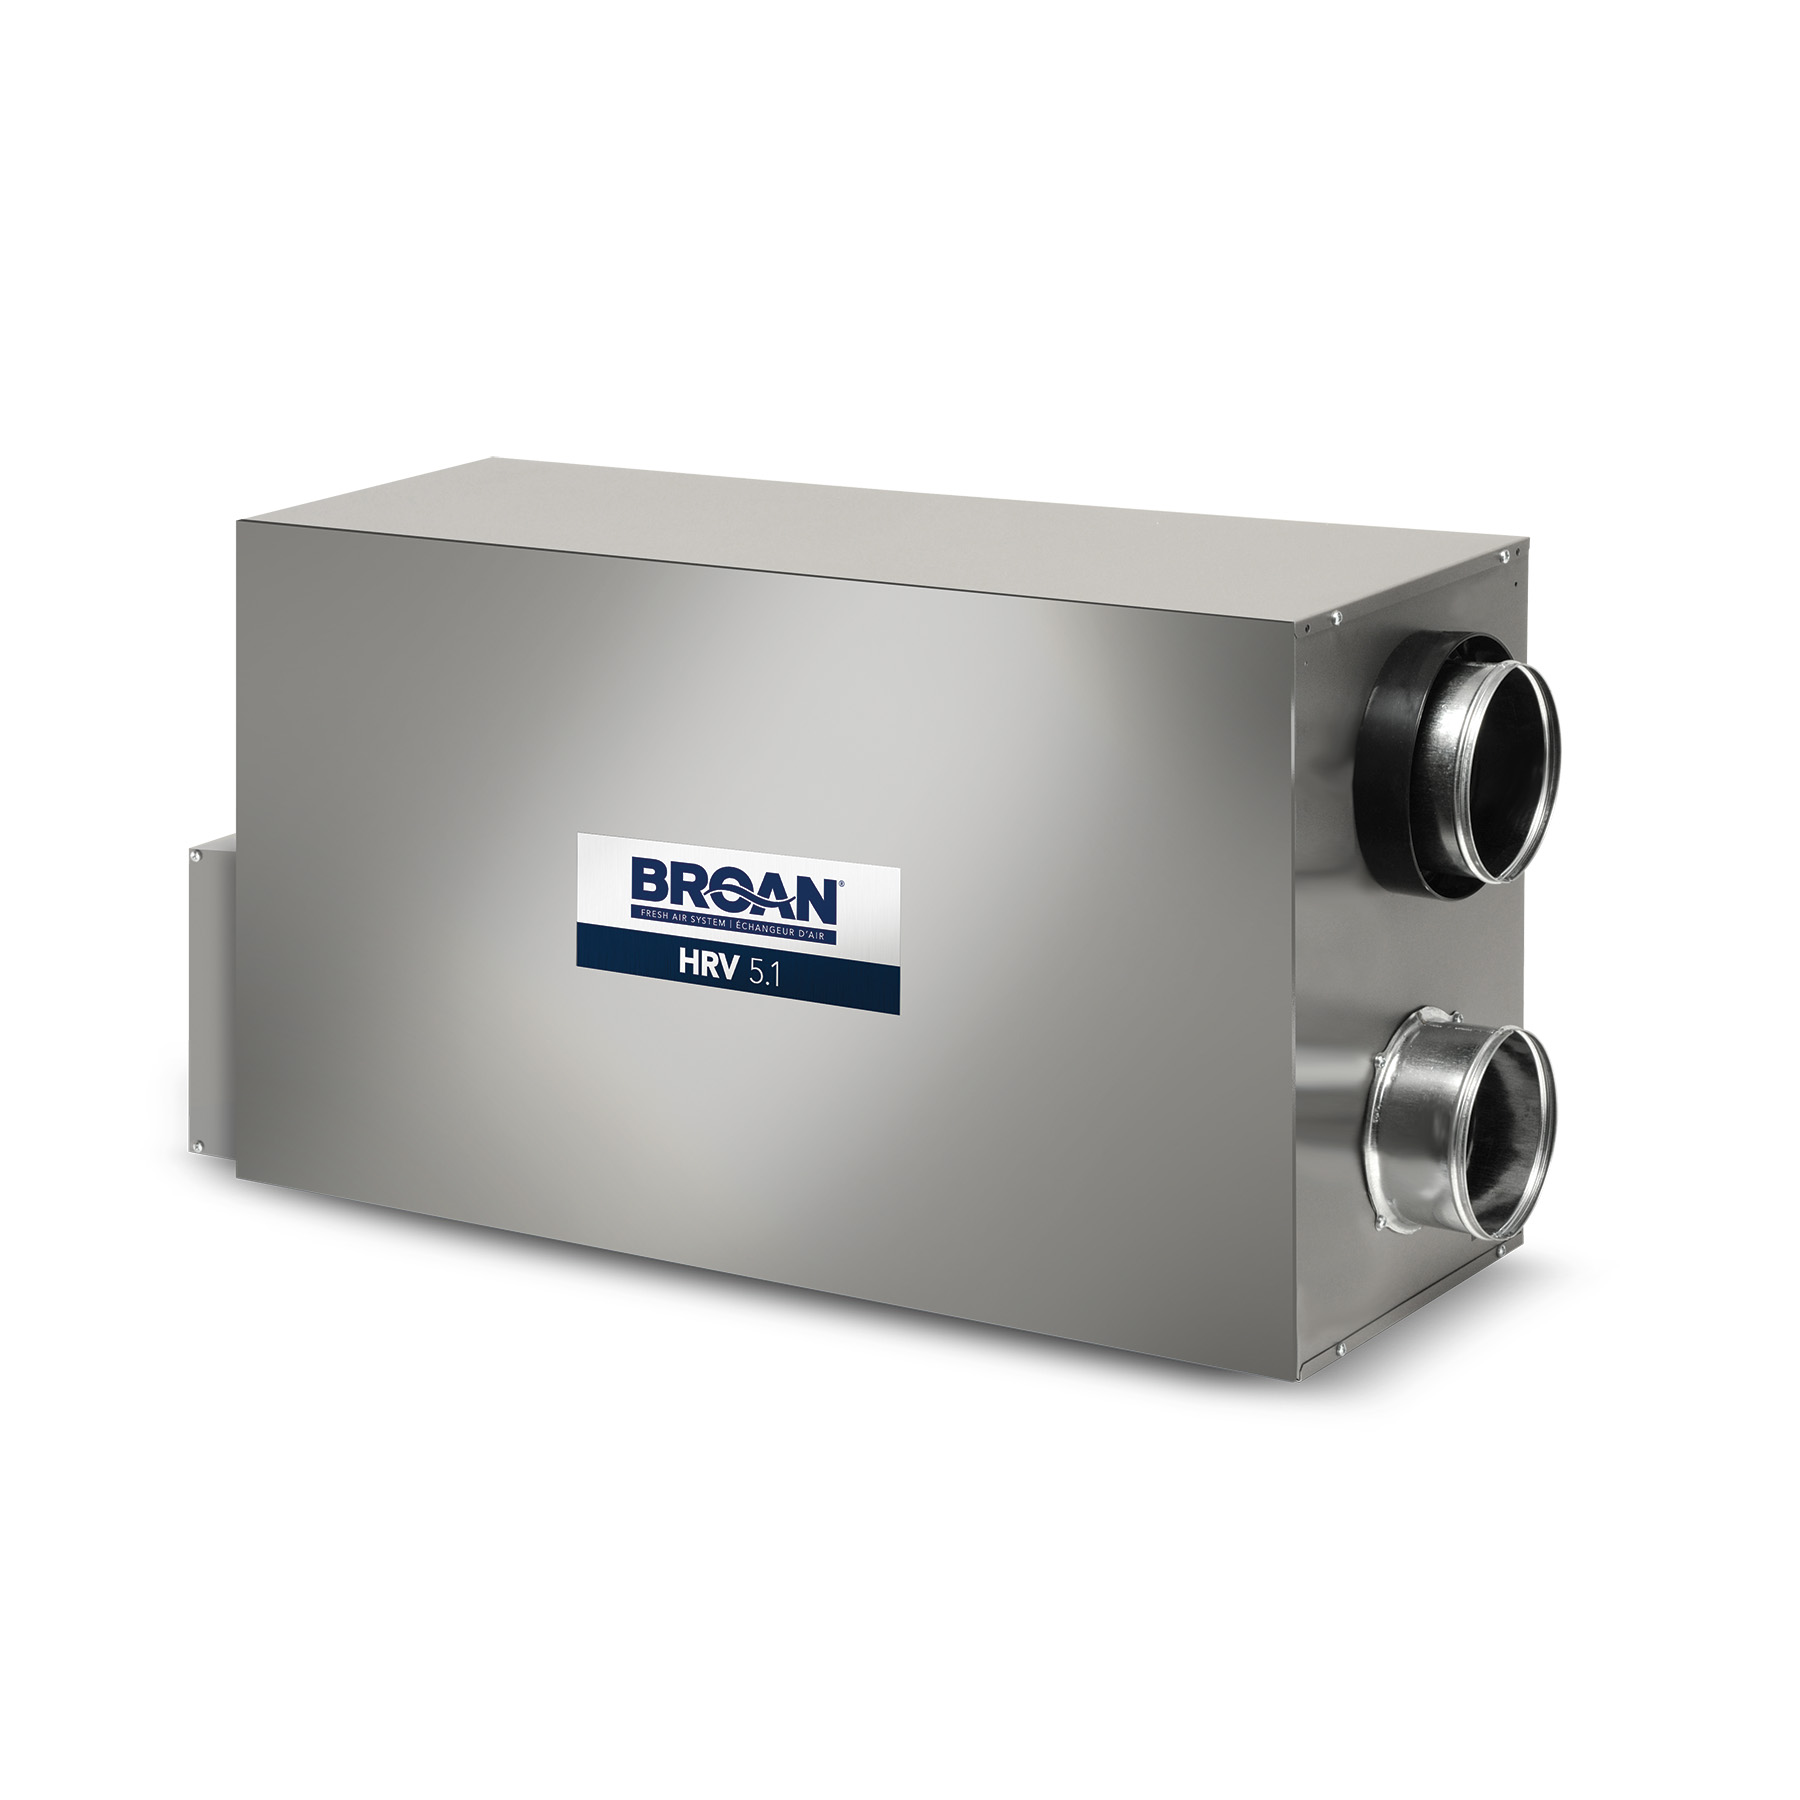 Broan® HRV 5.1, The Comfortable Solution